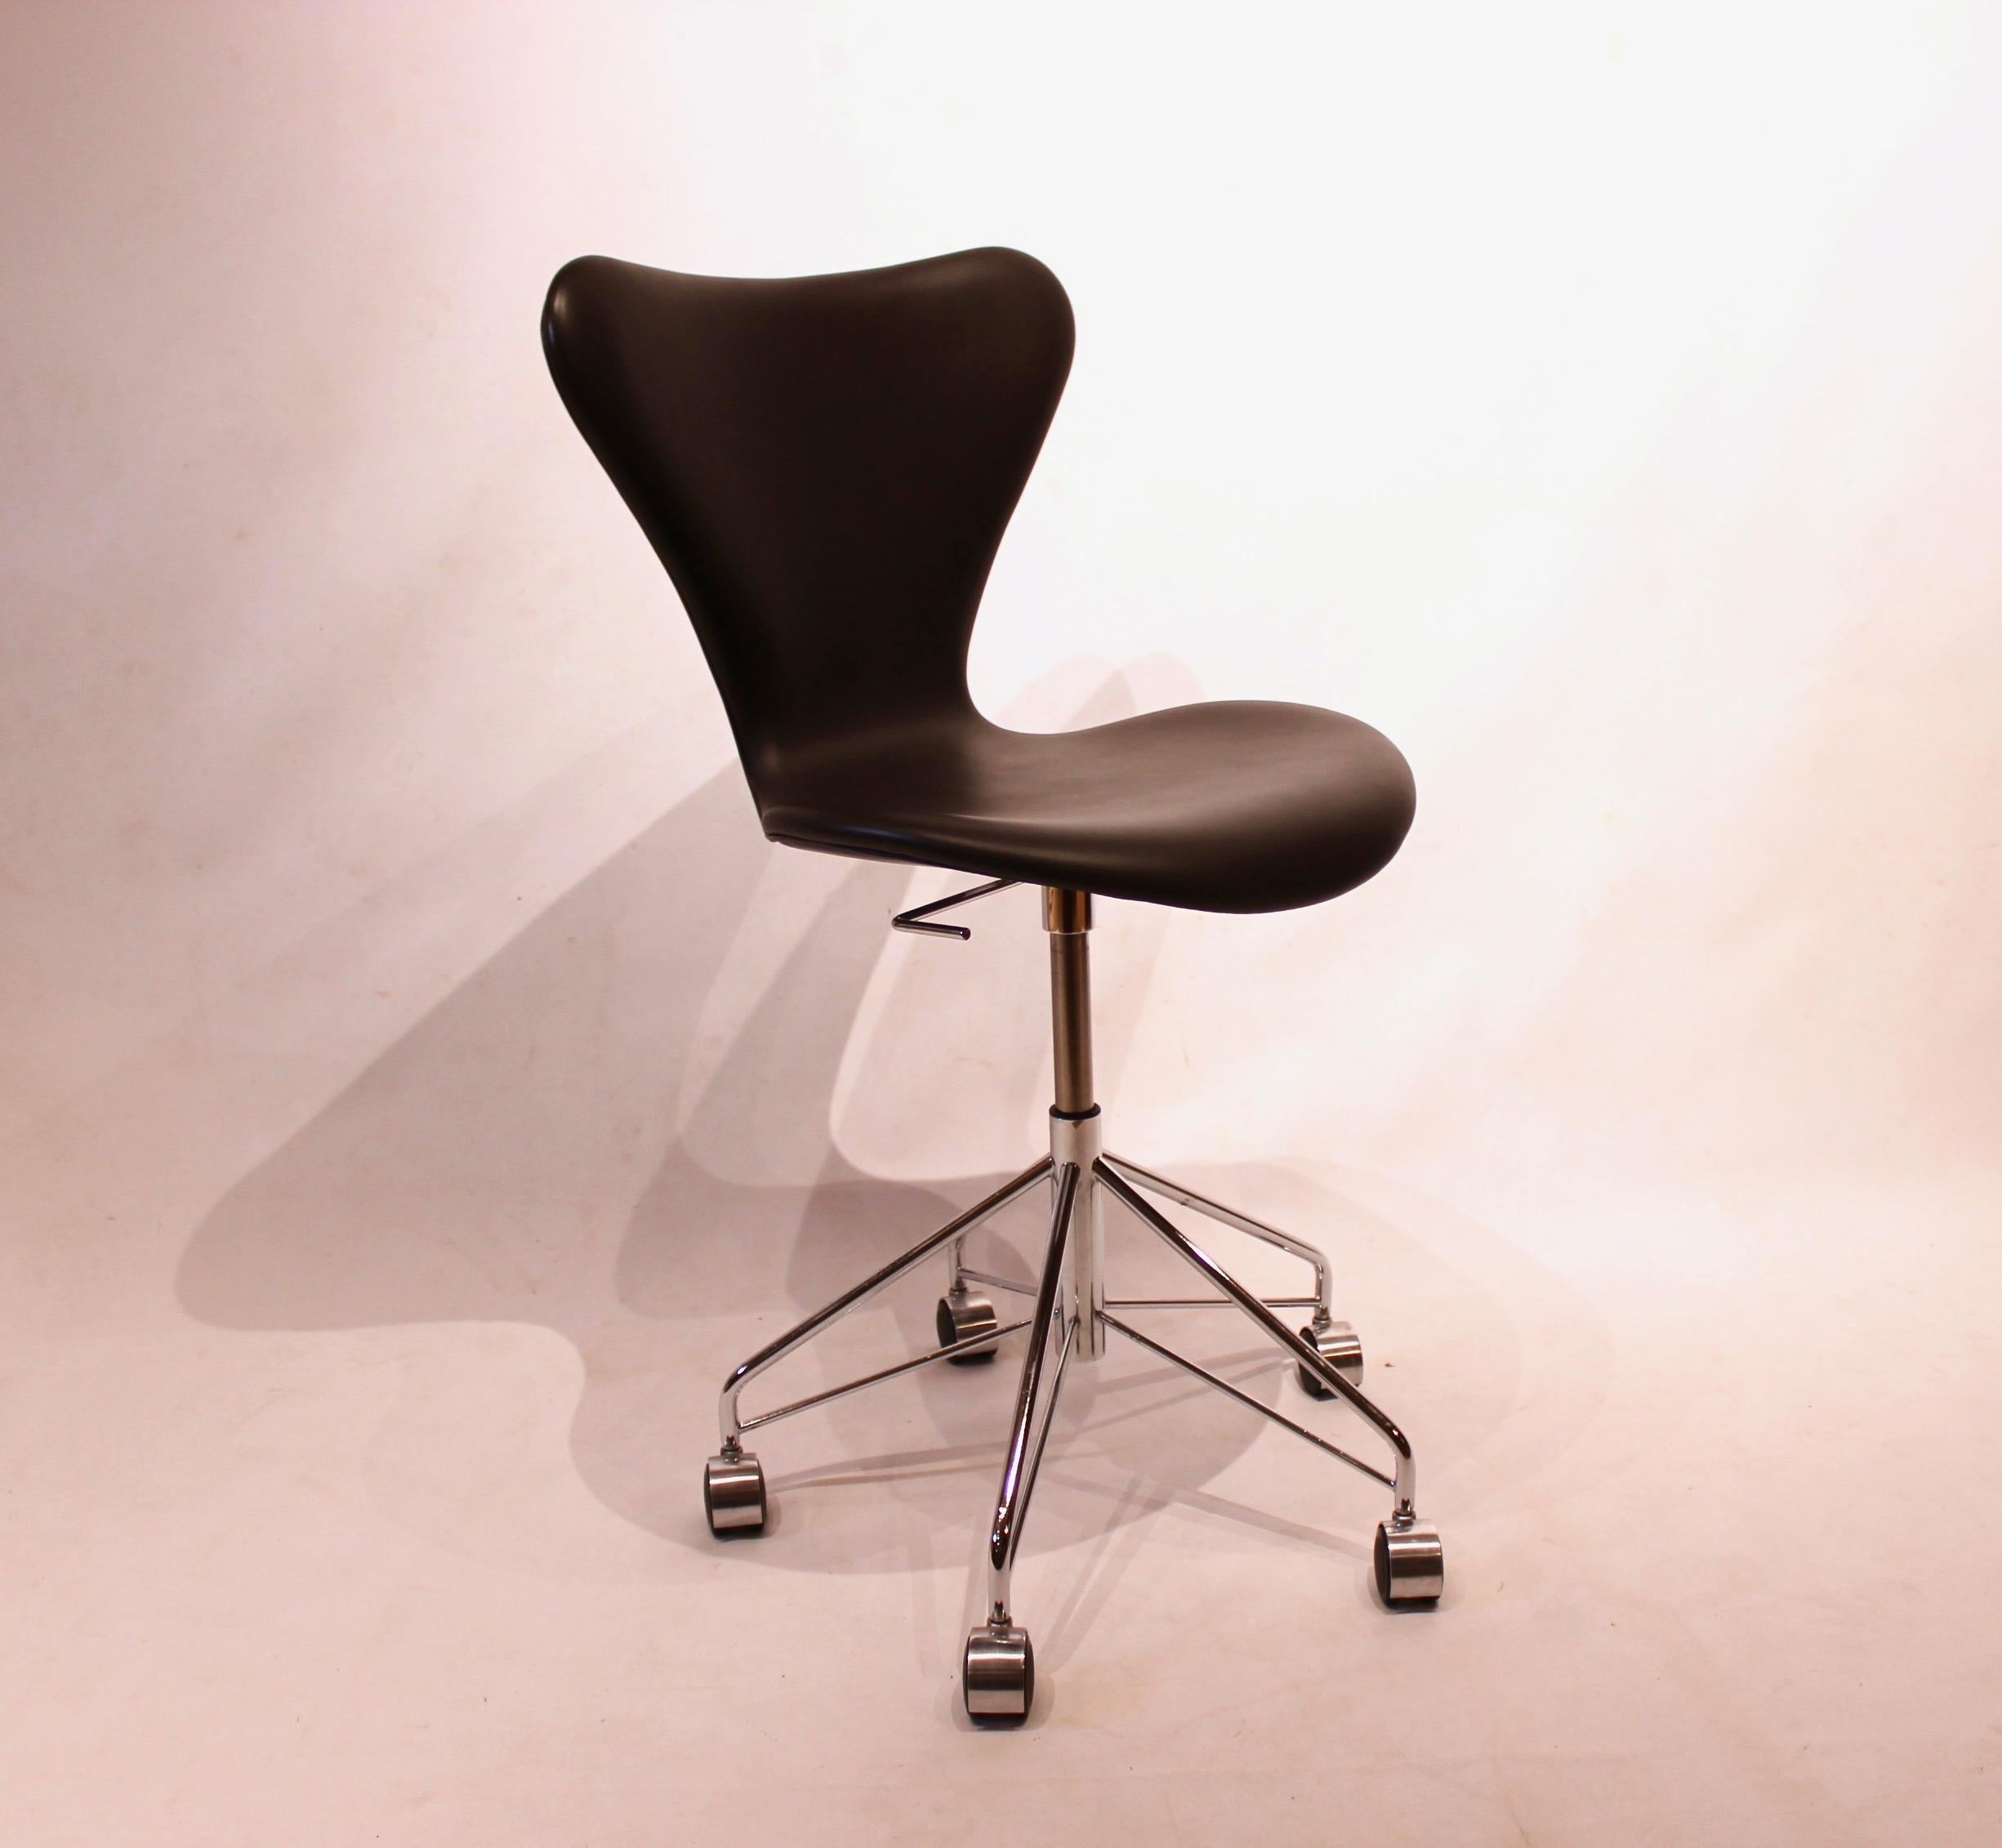 The Series 7™ 3117 swivel chair is manufactured by the world-famous Danish furniture company Fritz Hansen. The chair is made of black leather and has an elegant design with legs in chromed steel. It is fully padded for extra comfort, so you can sit